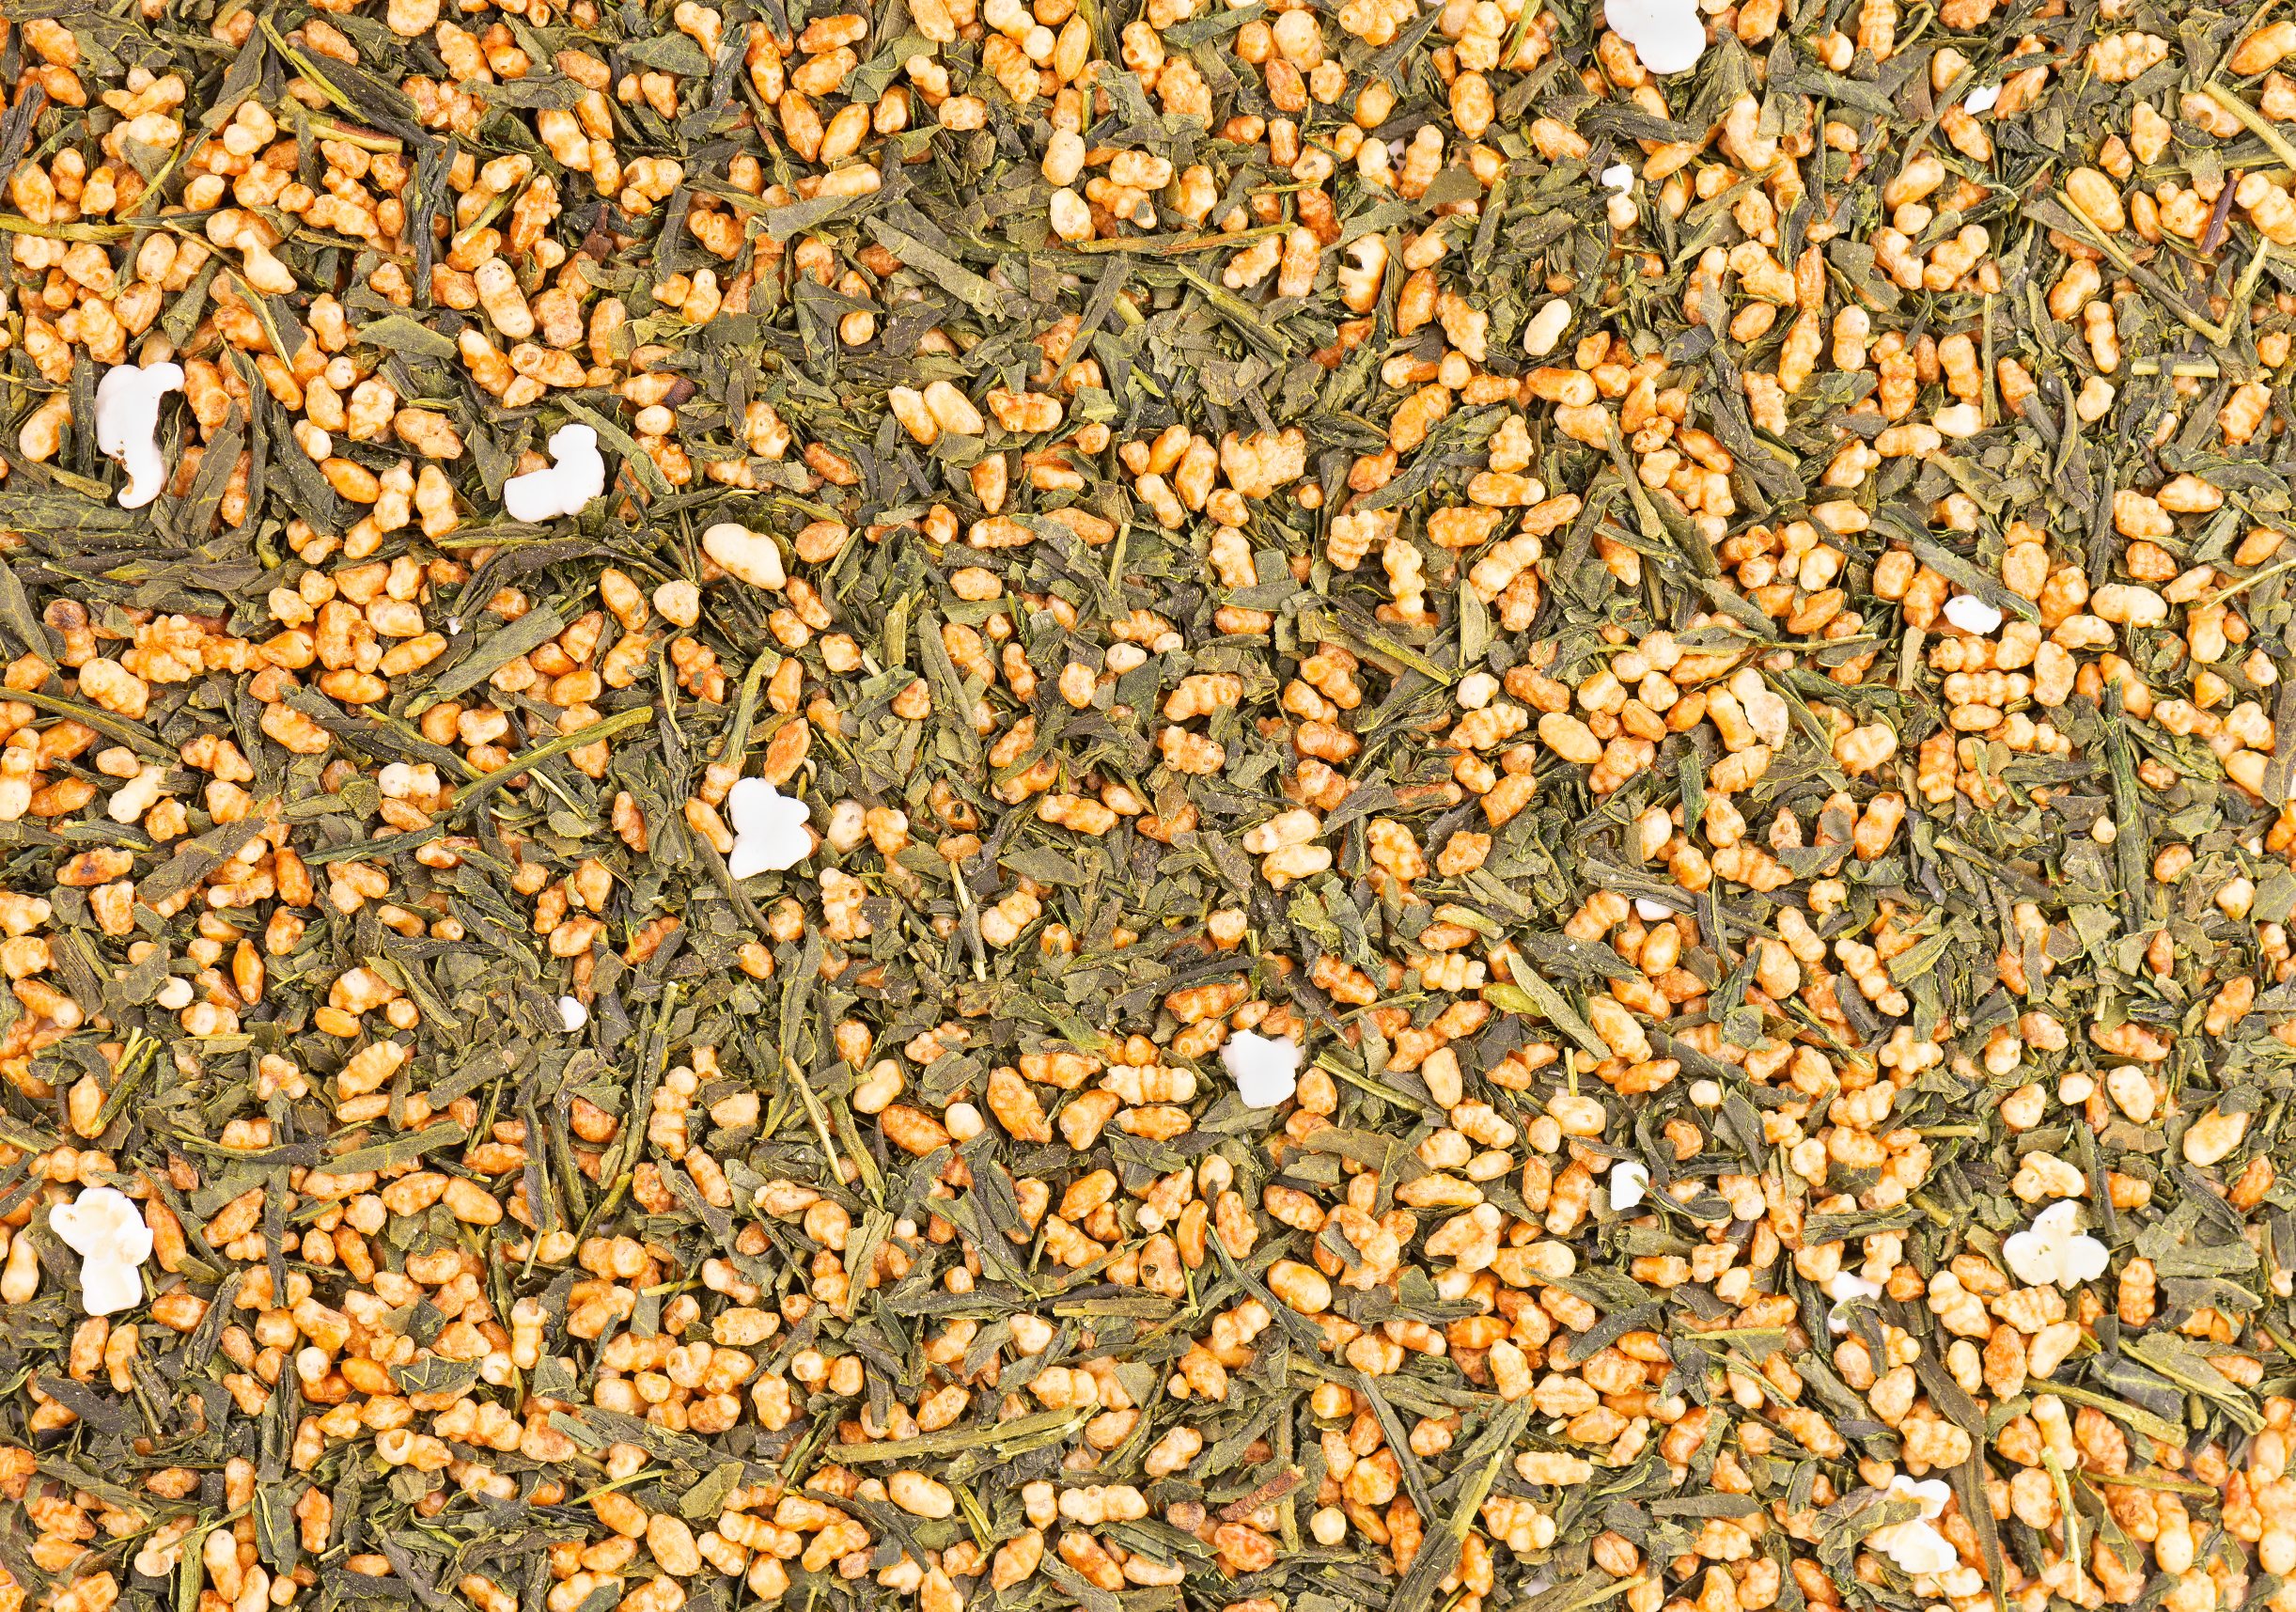 How To Make Genmaicha: Brewing Tips For The Best Results